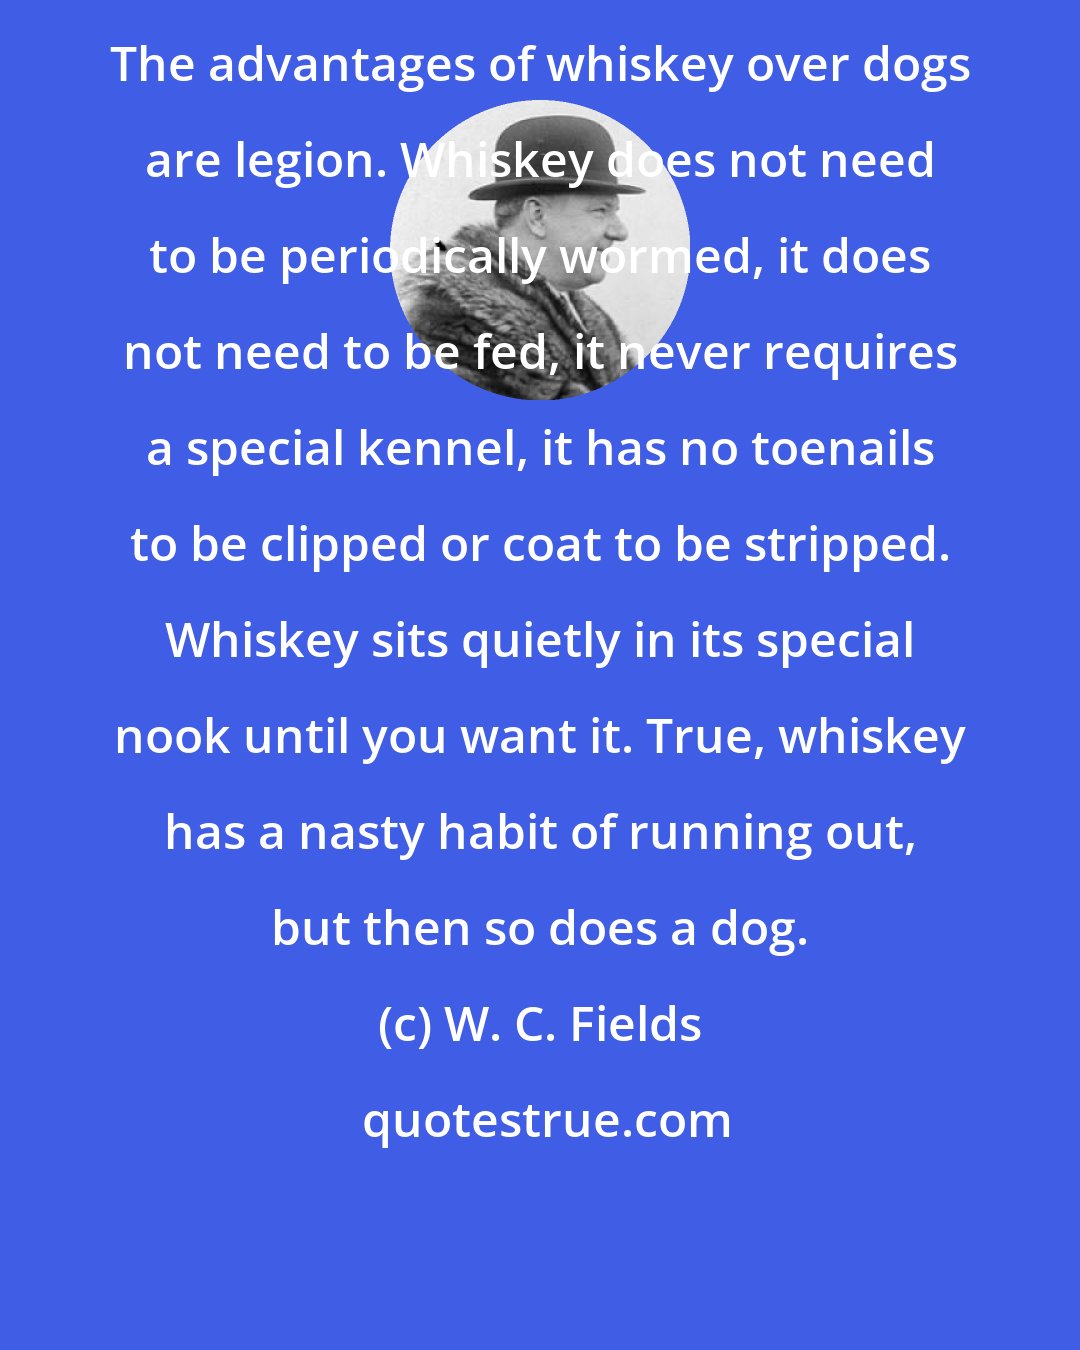 W. C. Fields: The advantages of whiskey over dogs are legion. Whiskey does not need to be periodically wormed, it does not need to be fed, it never requires a special kennel, it has no toenails to be clipped or coat to be stripped. Whiskey sits quietly in its special nook until you want it. True, whiskey has a nasty habit of running out, but then so does a dog.